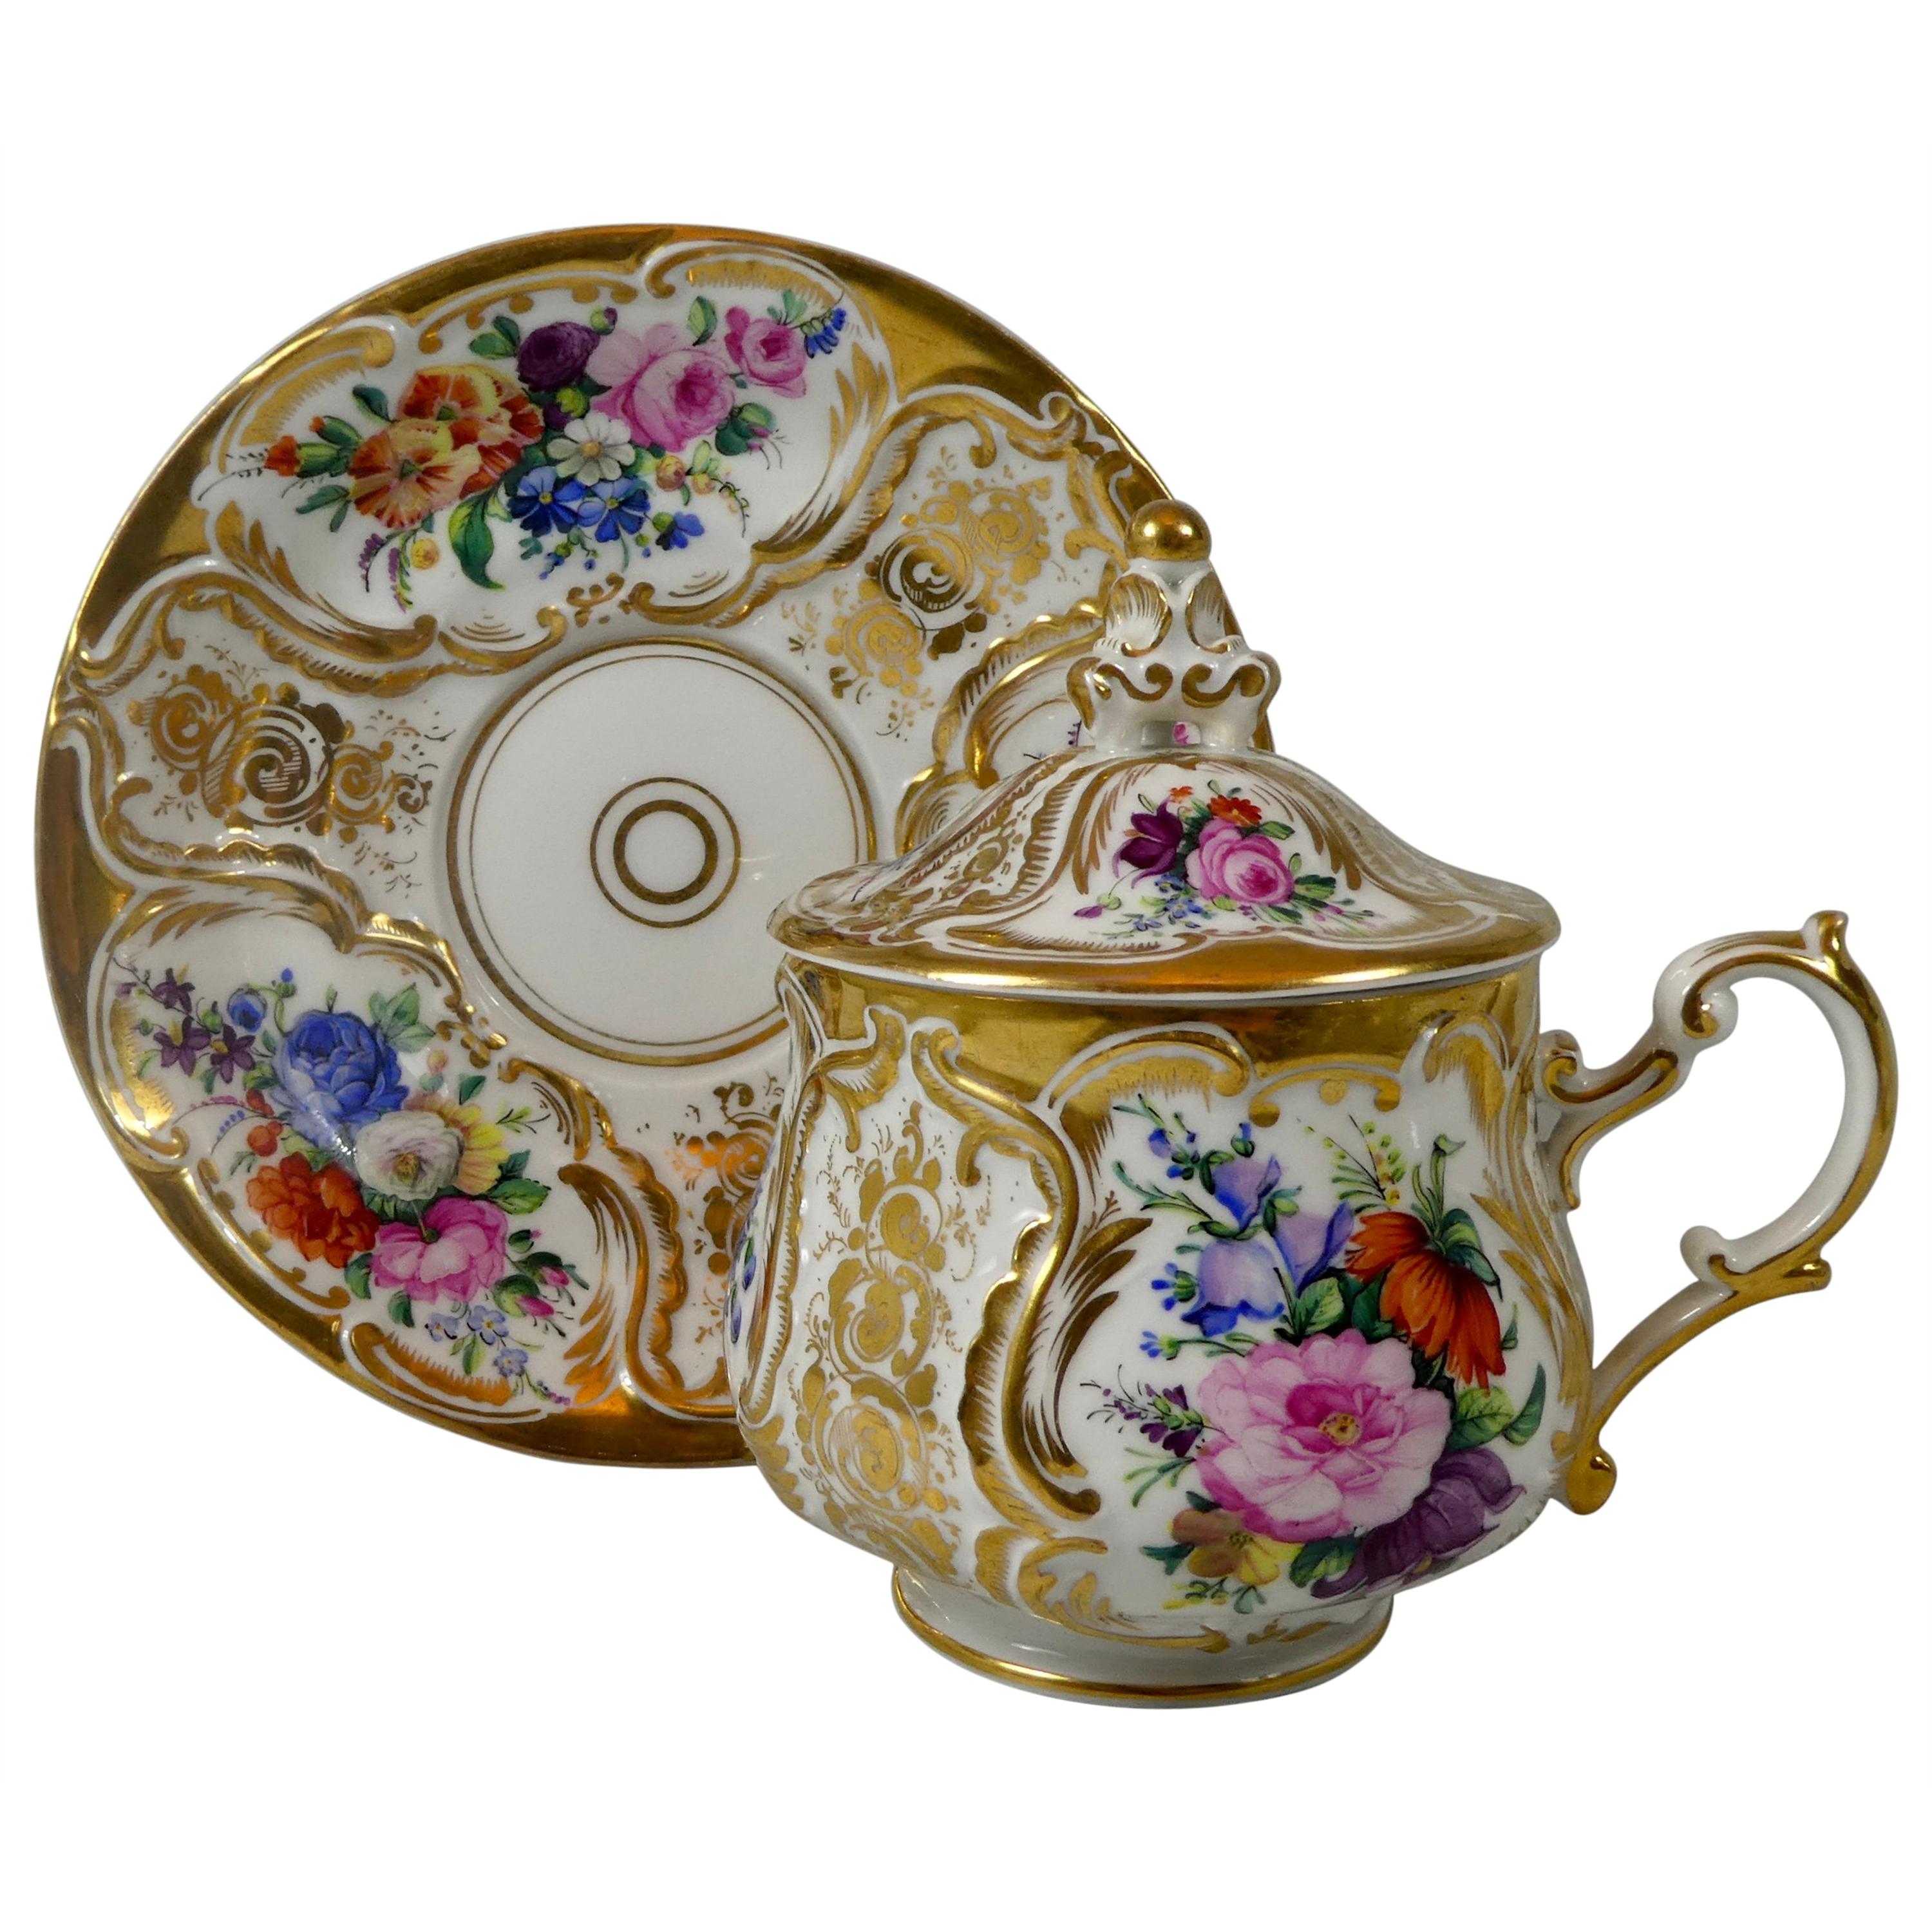 KPM Berlin Porcelain Chocolate Cup, Cover and Stand, circa 1860